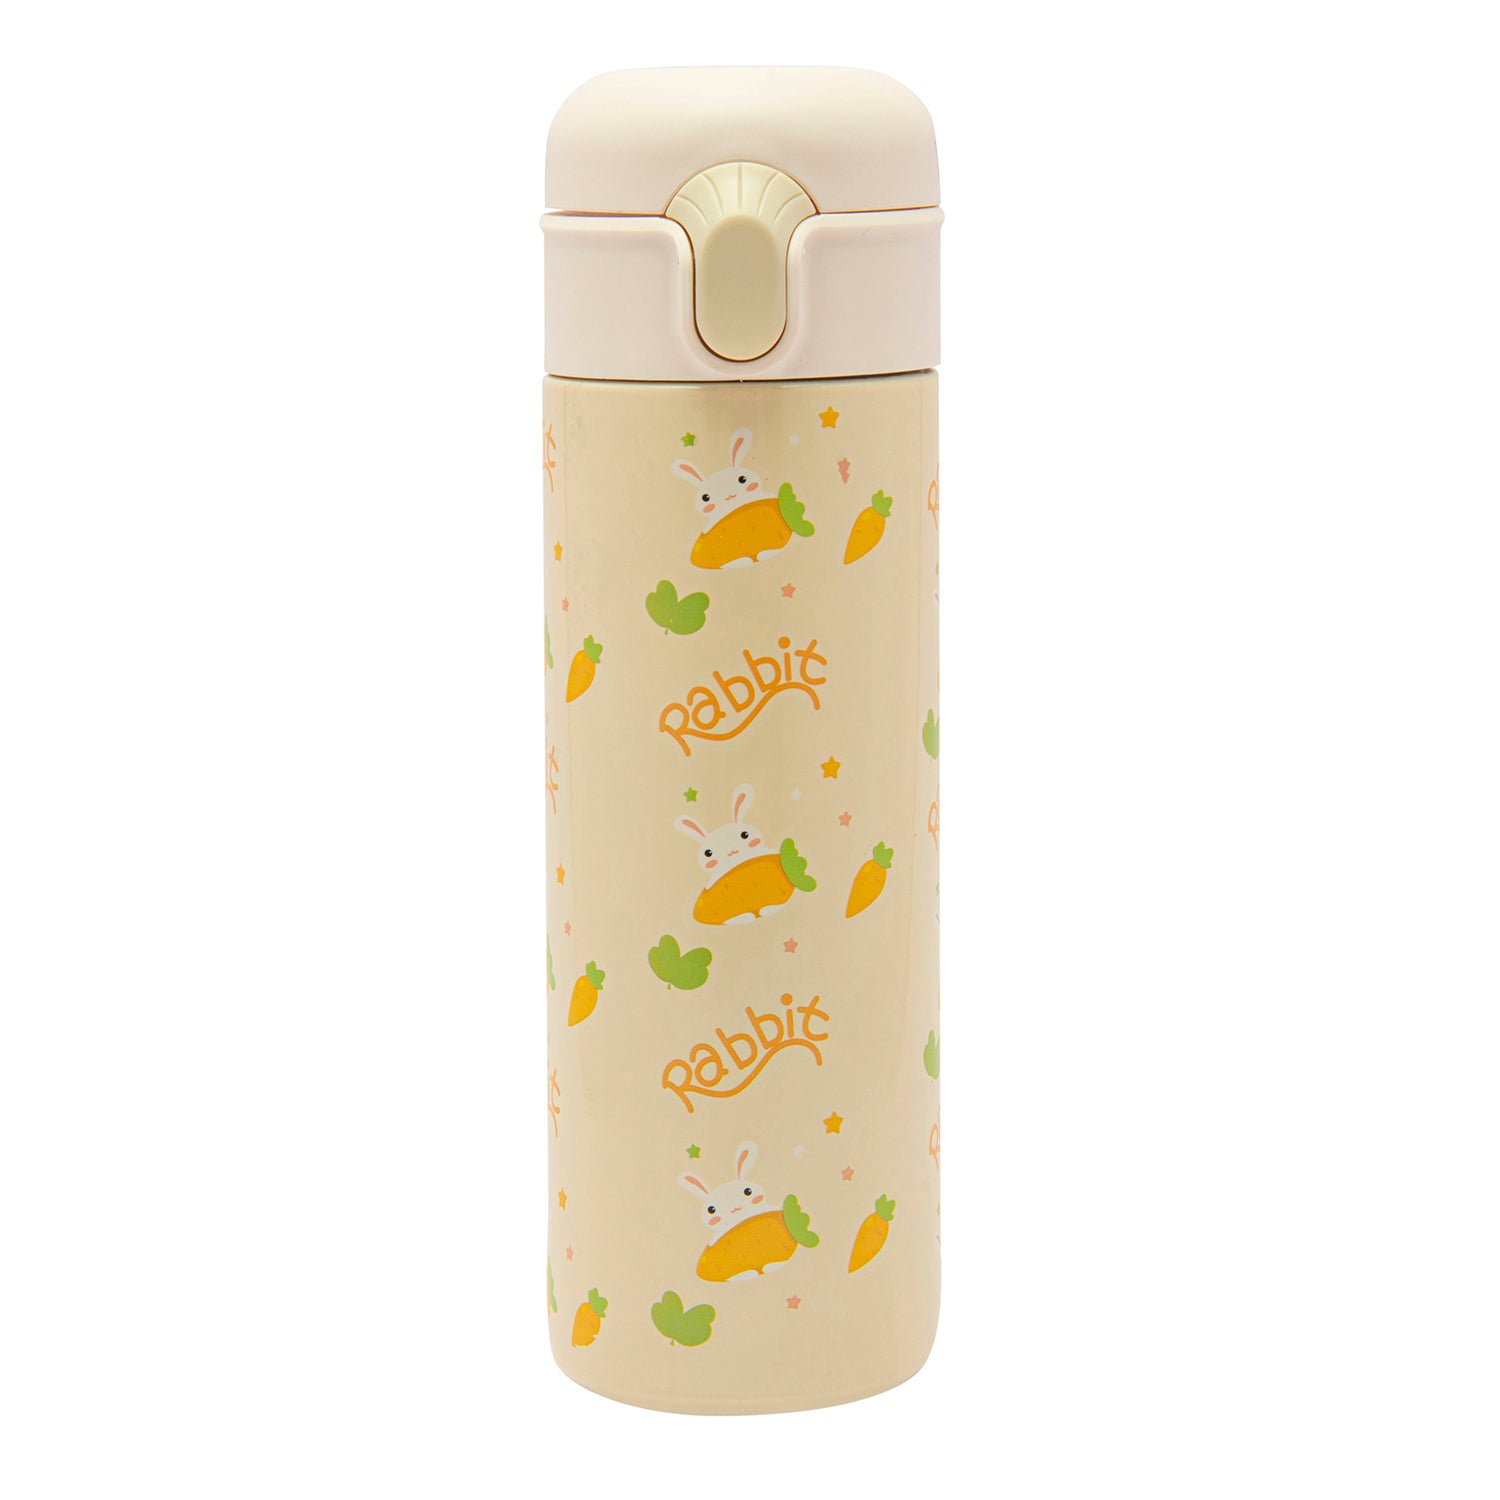 Rabbits Eat Carrots Offwhite 400 ml Stainless Steel Flask - Baby Moo